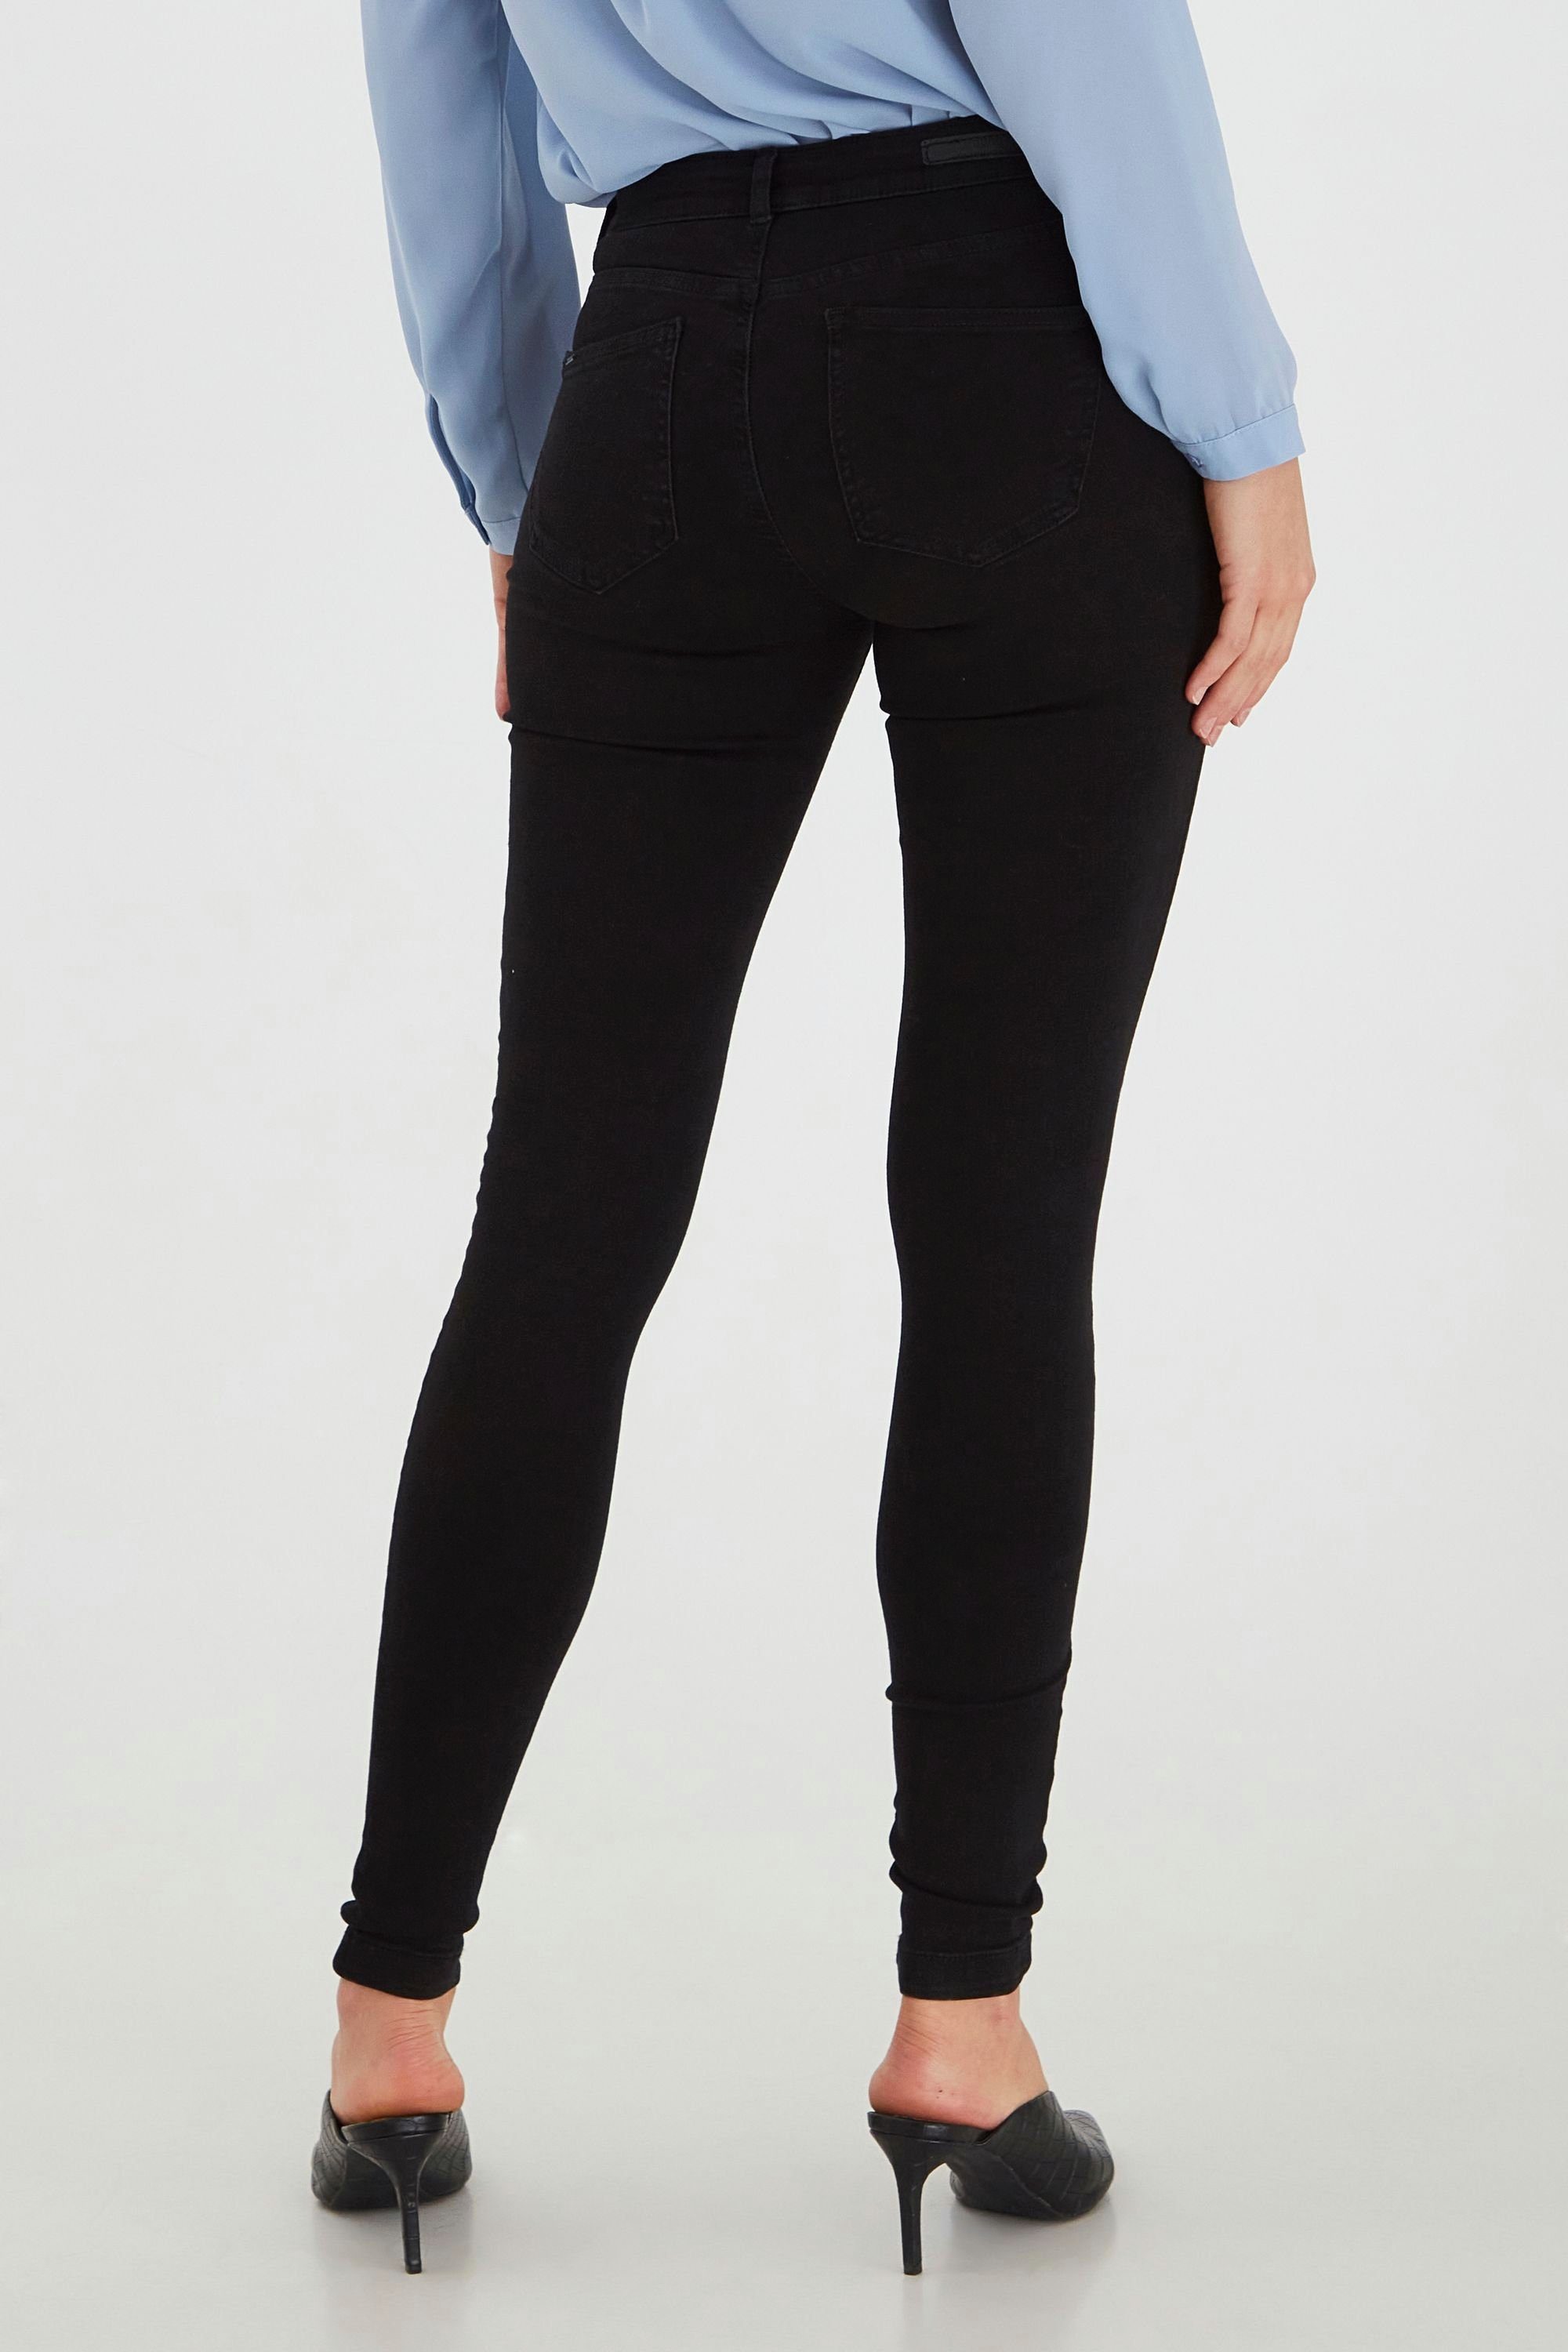 b.young Skinny-fit-Jeans BYLola Black 20803214 (80001) - Luni jeans